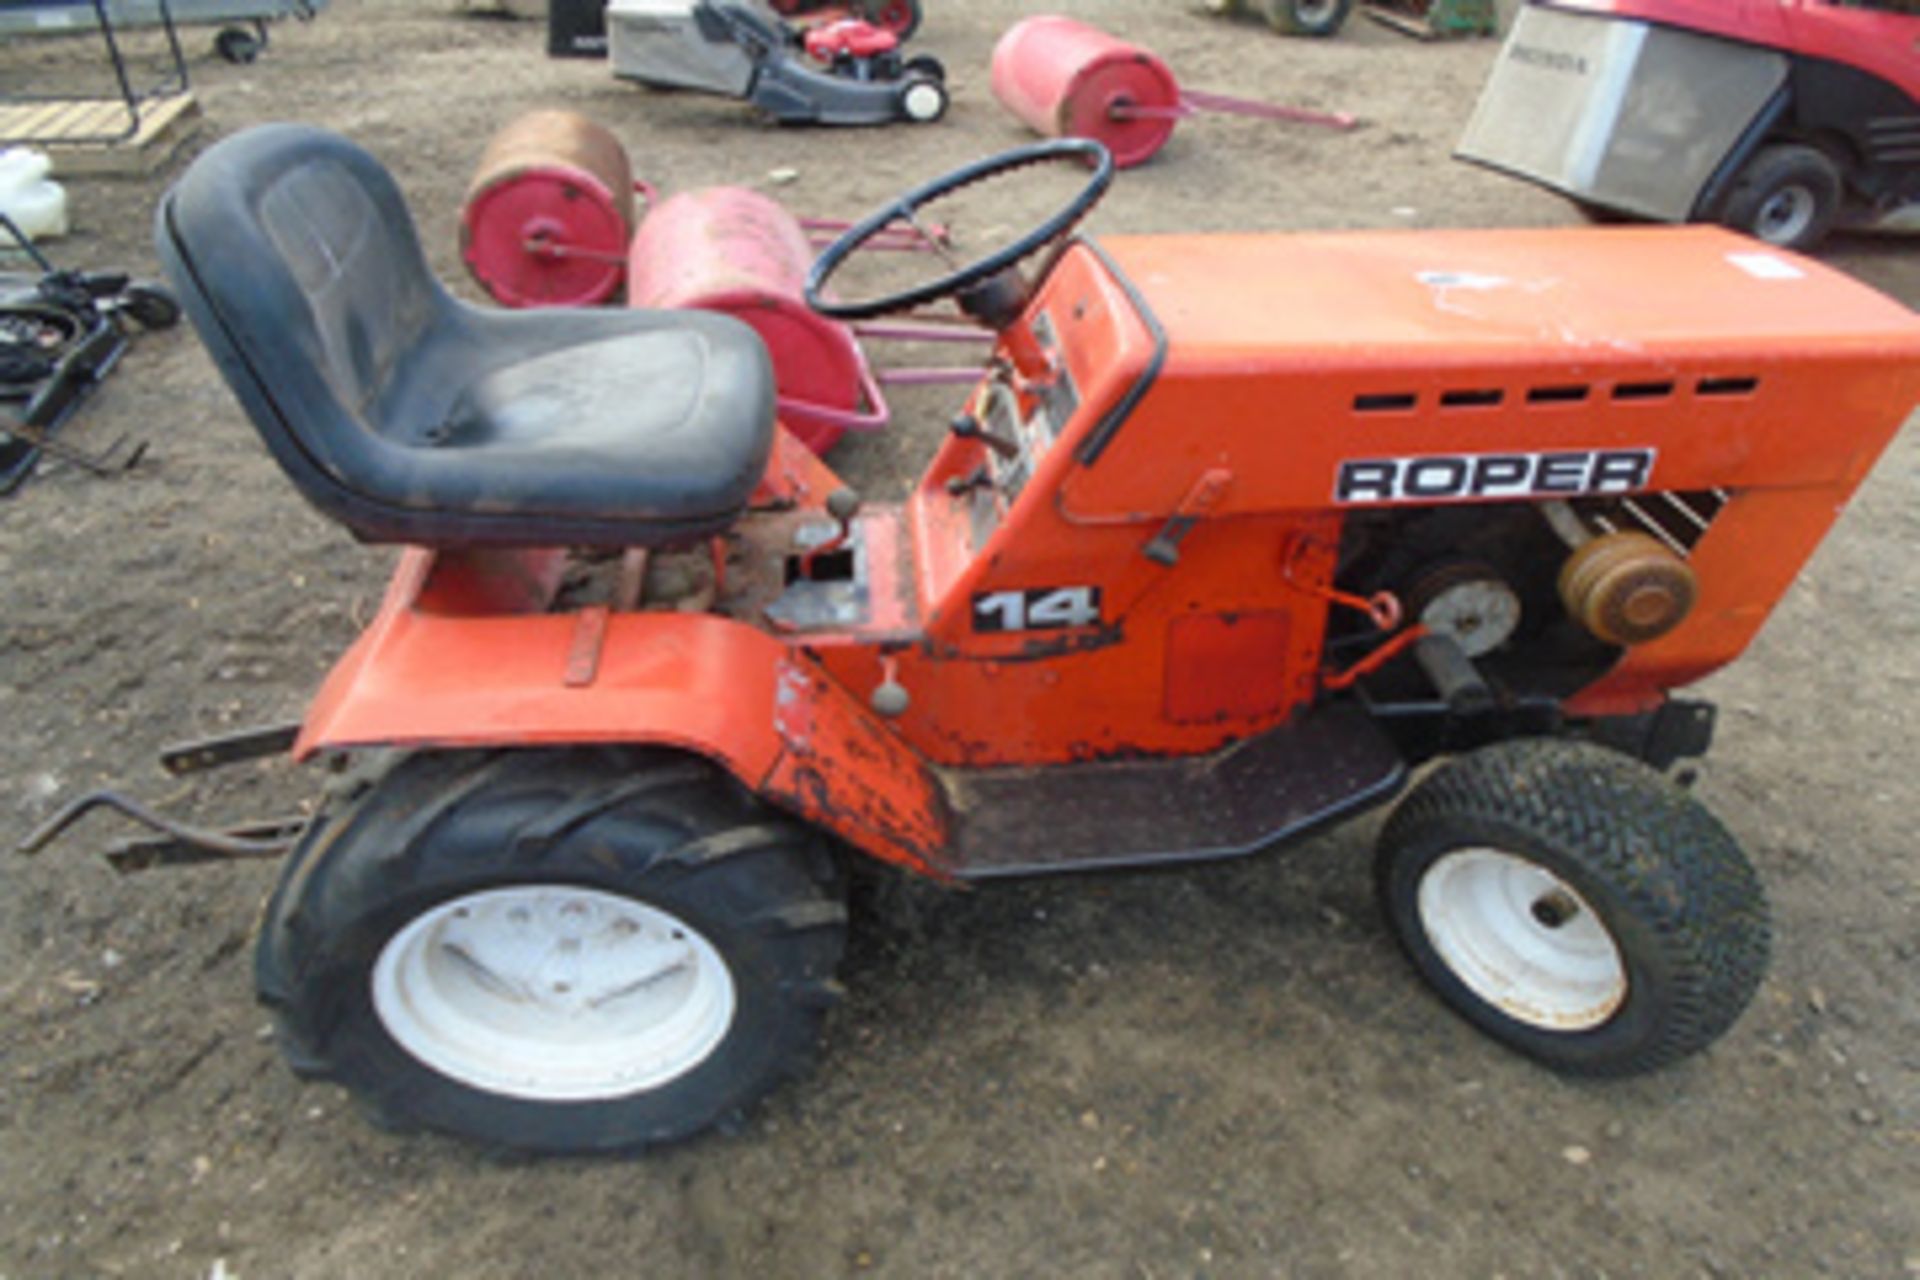 Roper 14 mini tractor with grass cutter and snow plough attachments - Image 8 of 8